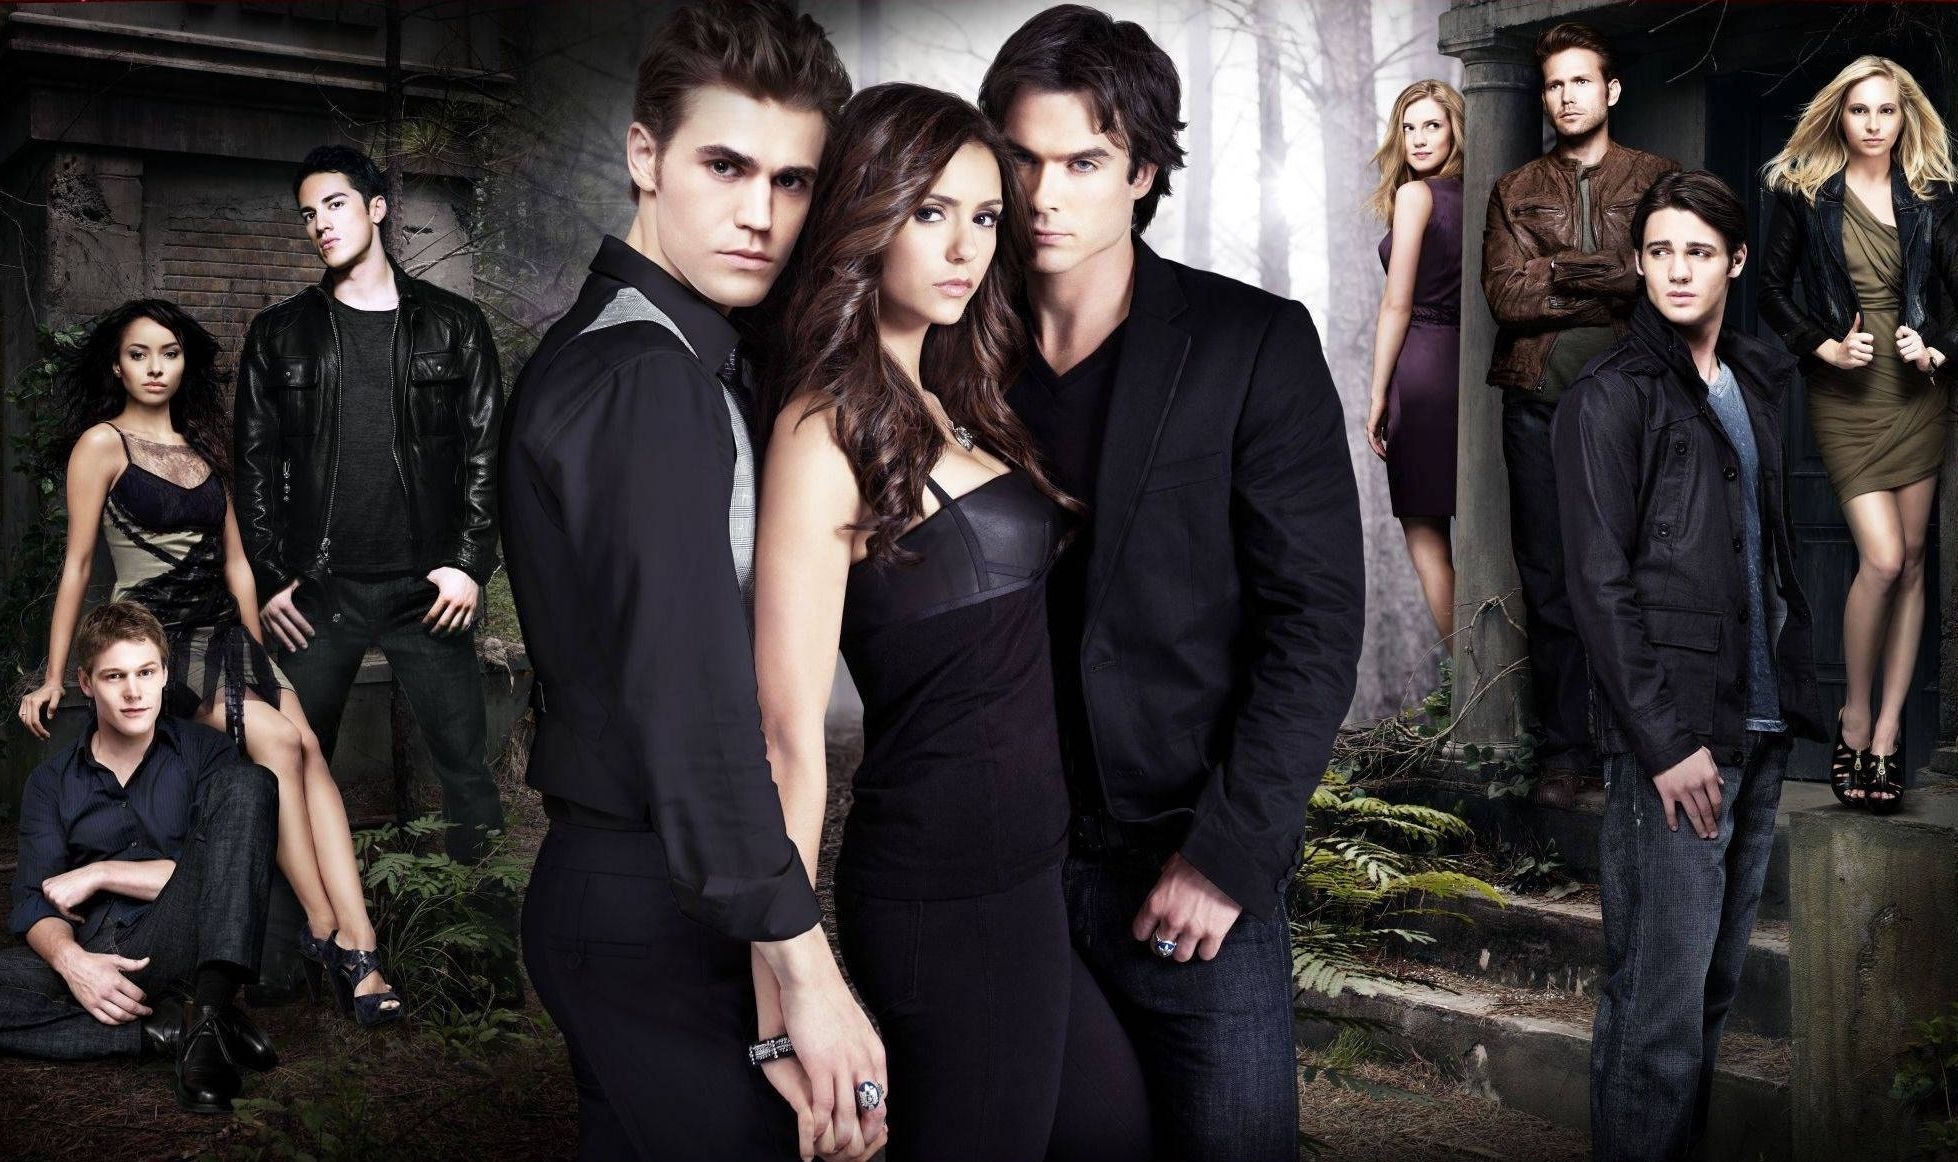 Free download Wallpaper The Vampire Diaries The Vampire Diaries Photo 15972205 for your Desktop, Mobile \u0026 Tablet | Explore 76+ Vampire Diaries Wallpapers | Ian Somerhalder Vampire Diaries Wallpaper, Vampire Diaries 1960x1170